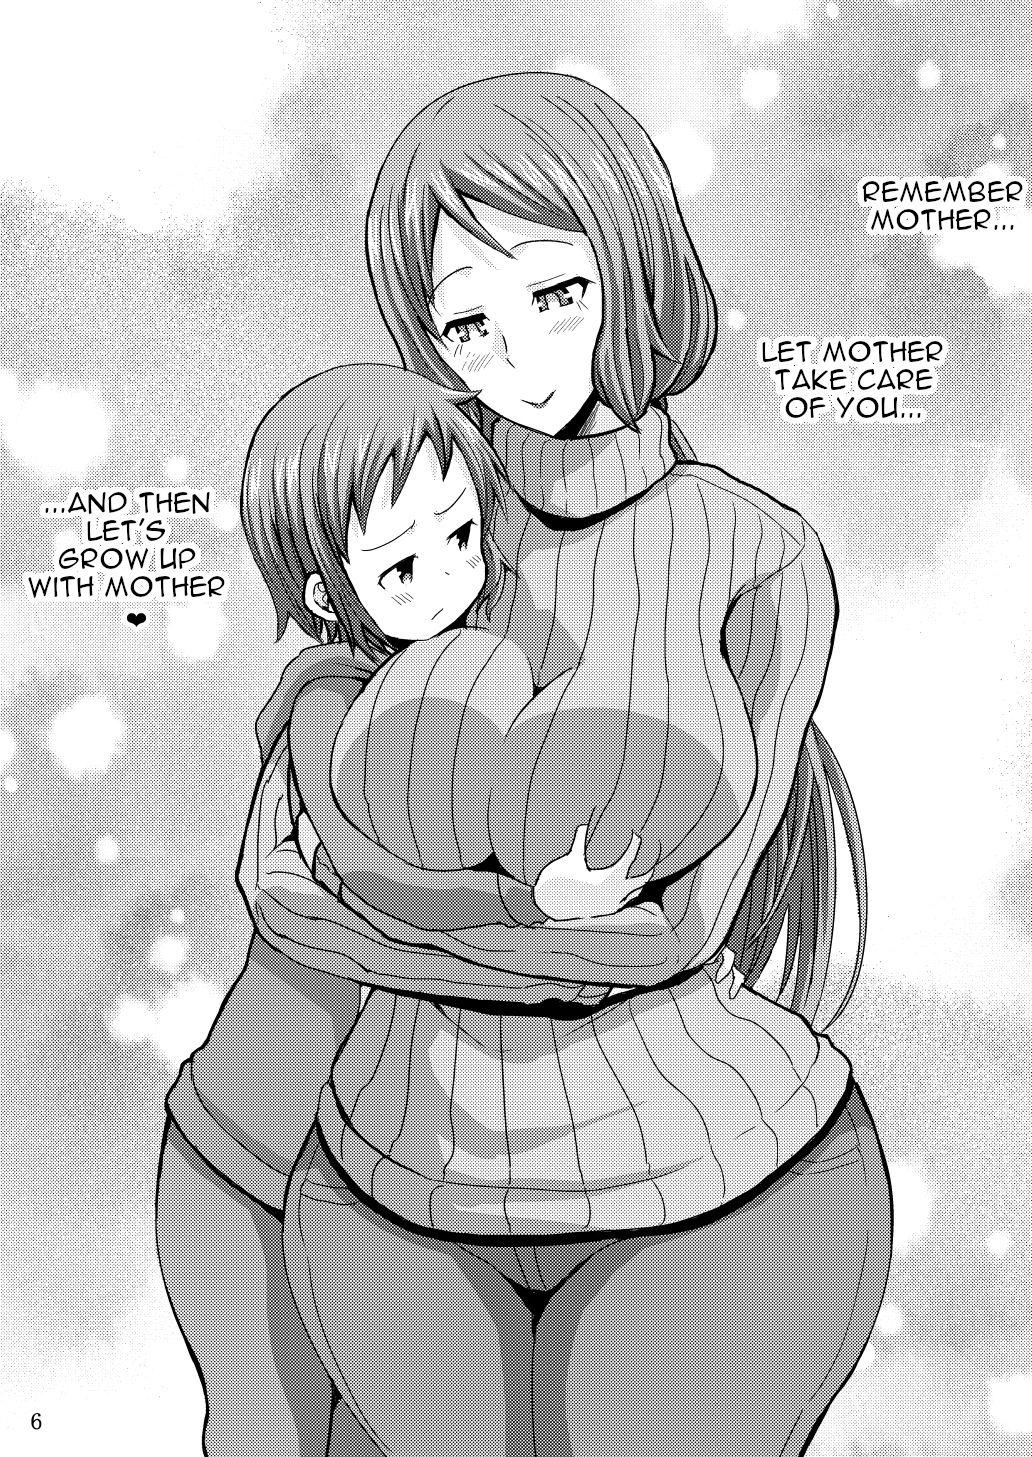 Cdmx Okaa-san to Hagukumimasho | Let's grow up with mother - Gundam build fighters Real Orgasms - Page 5